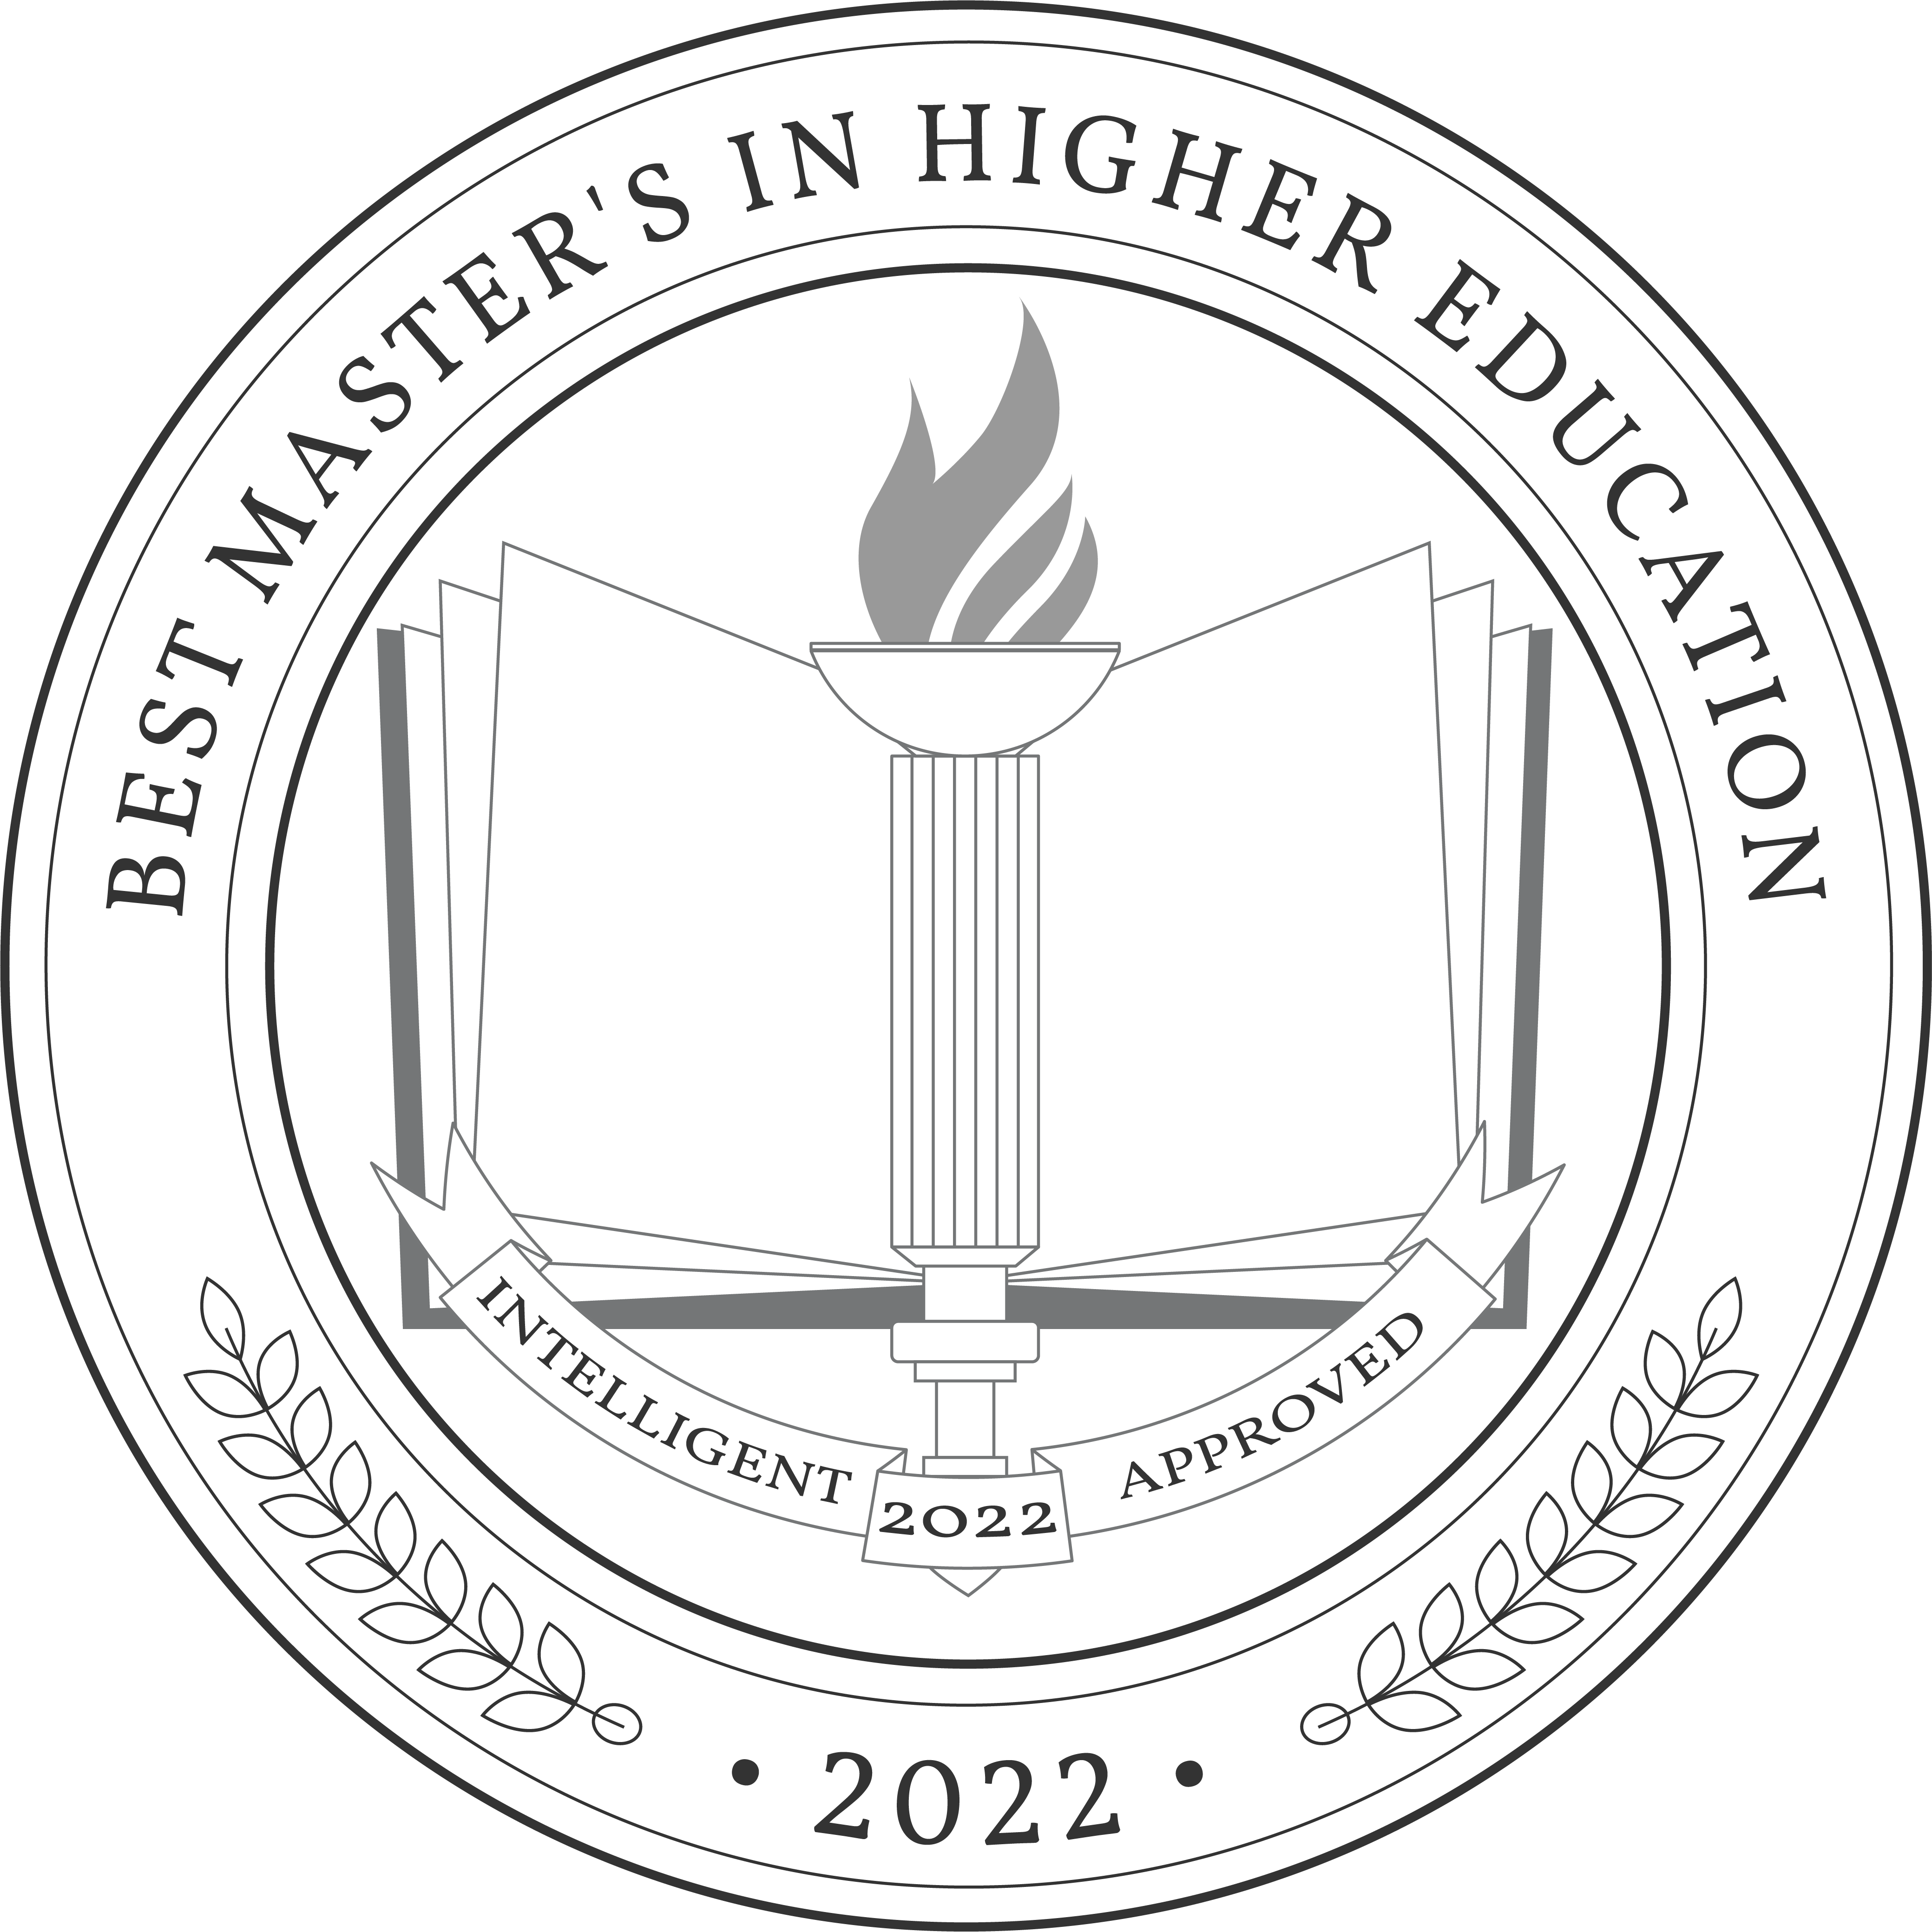 Best Master's in Higher Education Badge-1